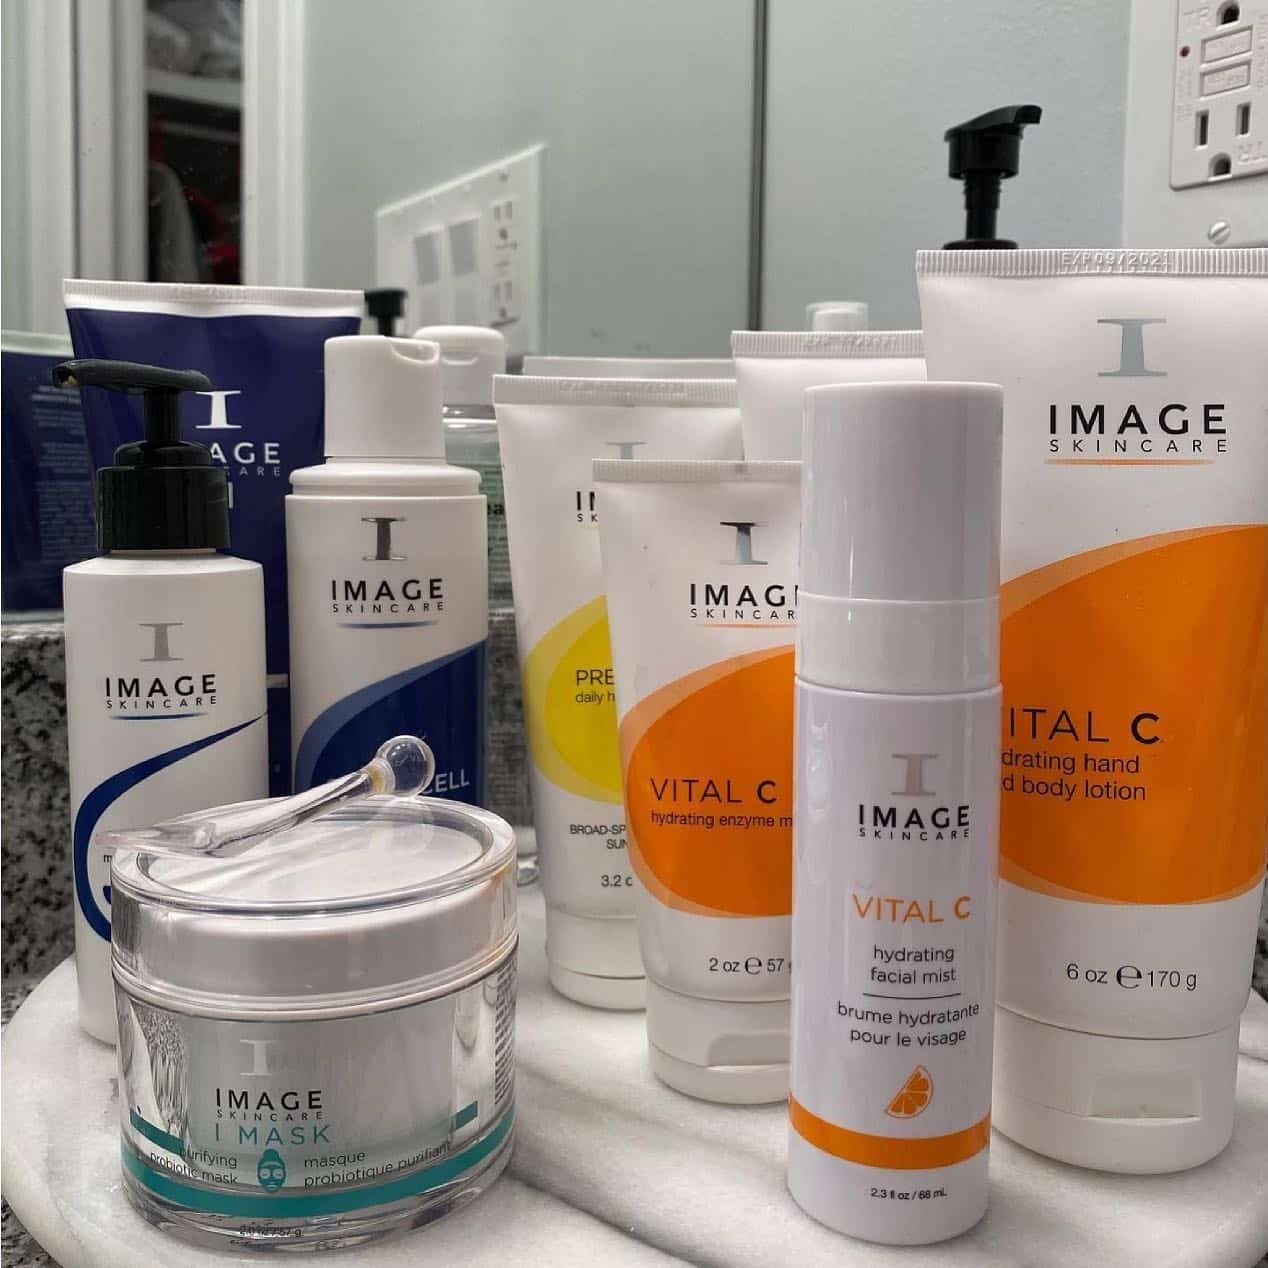 Image Skincare Review - Must Read This Before Buying